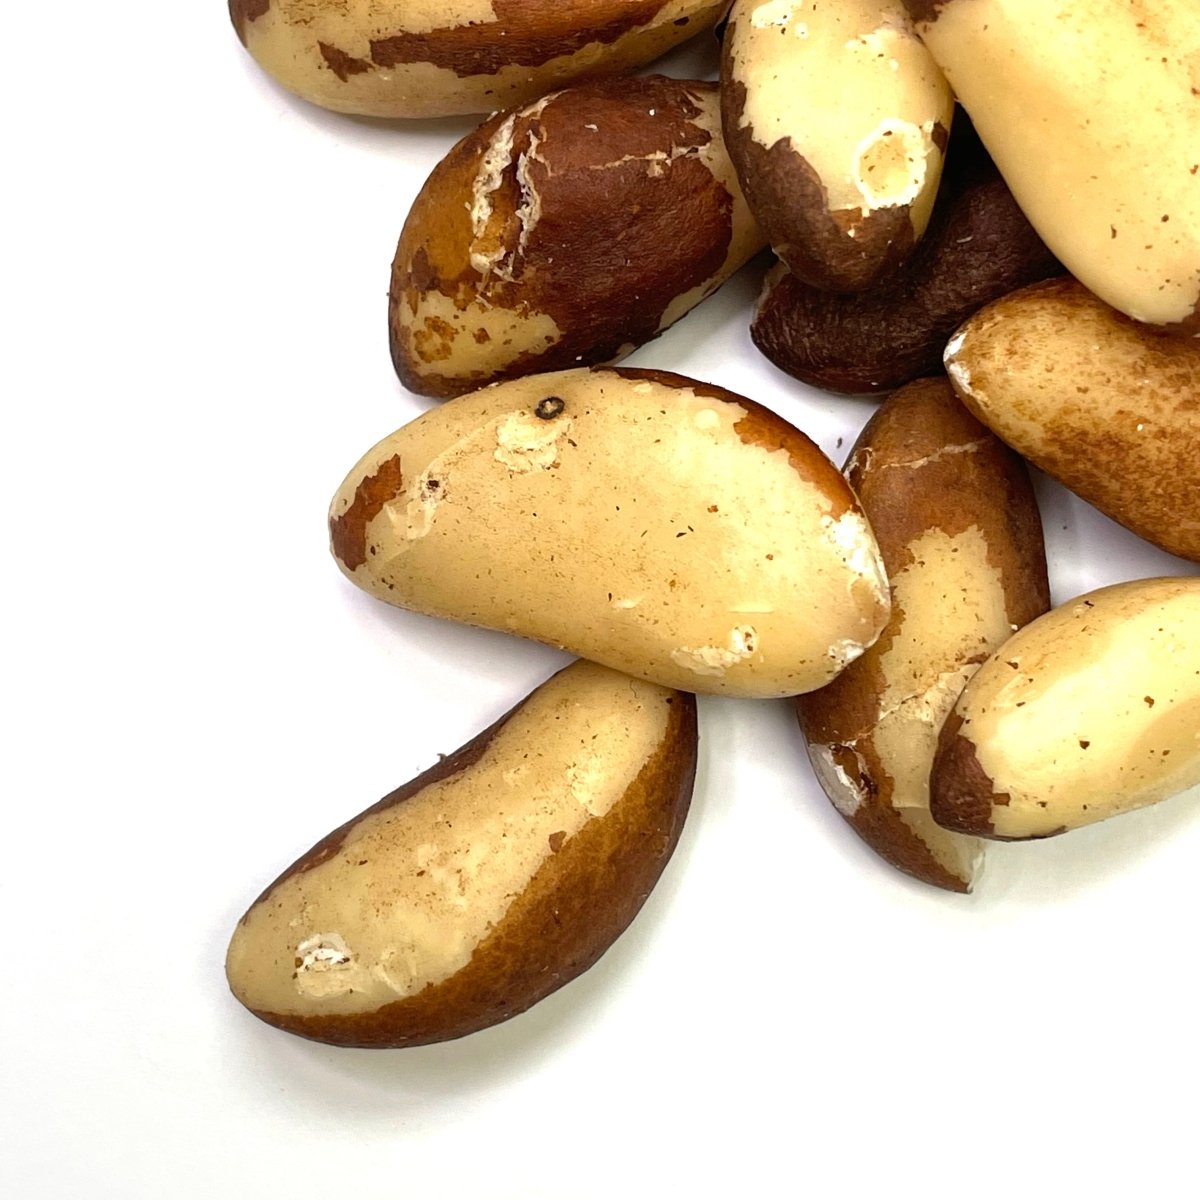 Salted Deluxe Mixed Nuts - Nutworks Canada